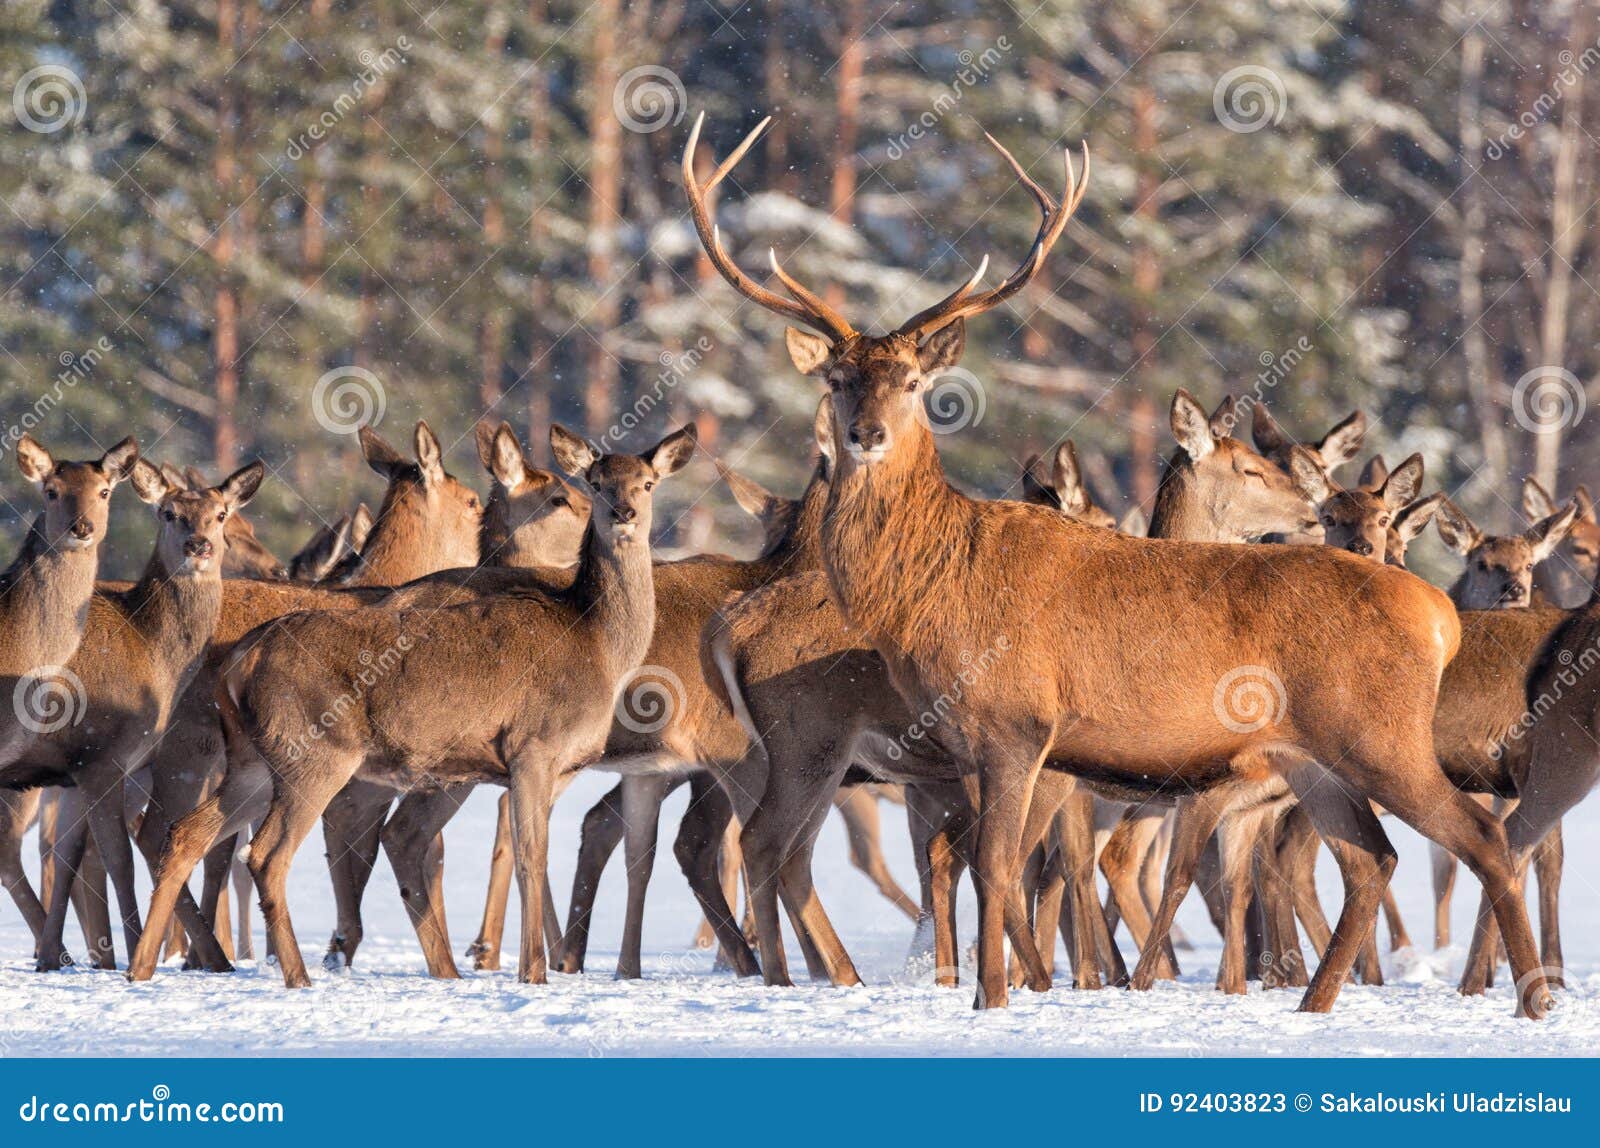 great noble deer surrounded by herd.portrait of a deer, while looking at you.adult deer with big beautiful horns on snowy field.